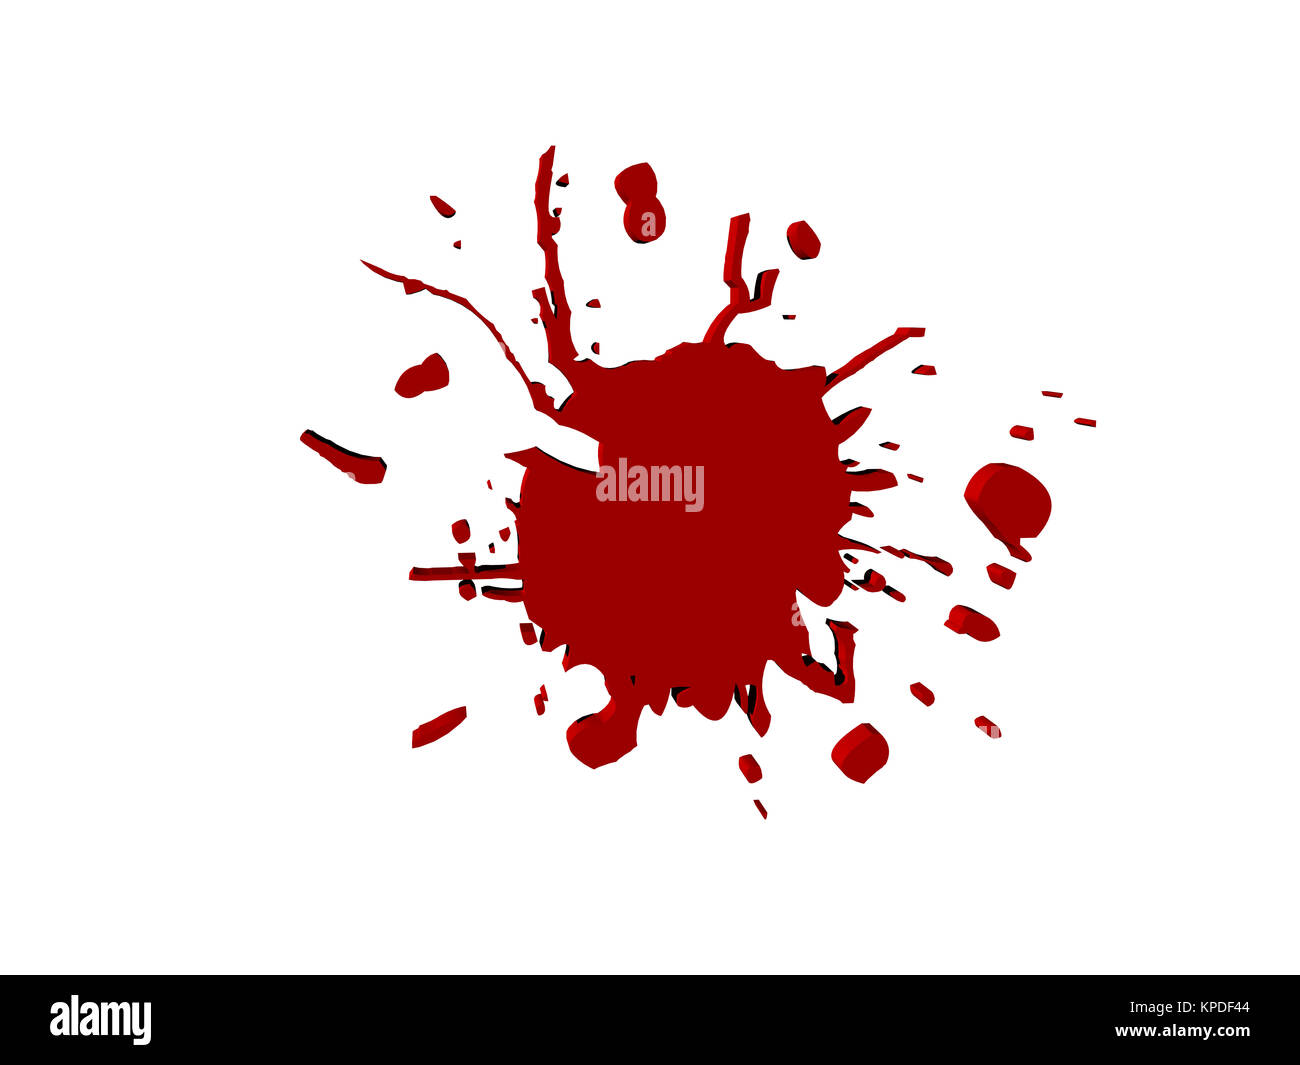 exempted bloodstains Stock Photo